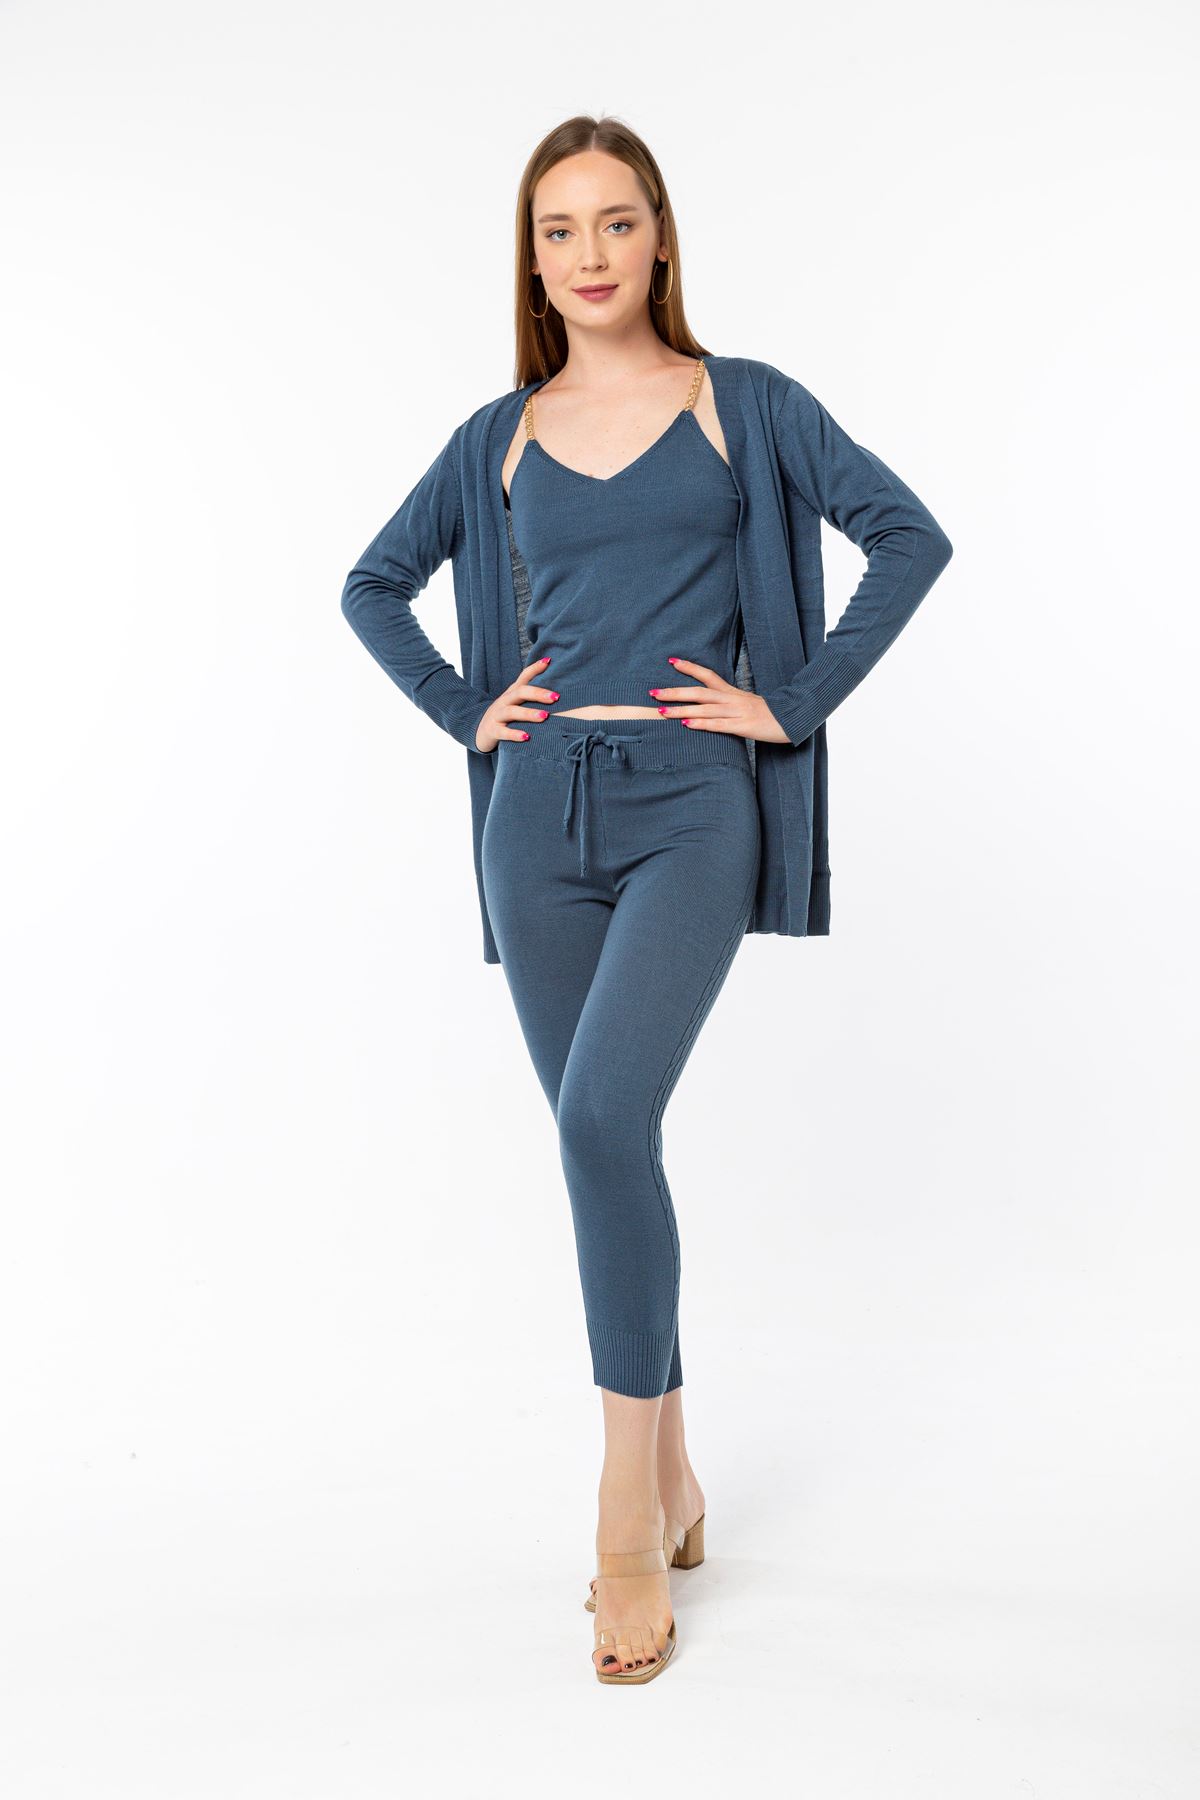 Knitwear Fabric Wide V Neck Long Full Fit Women'S Set 3 Pieces - Navy Blue 